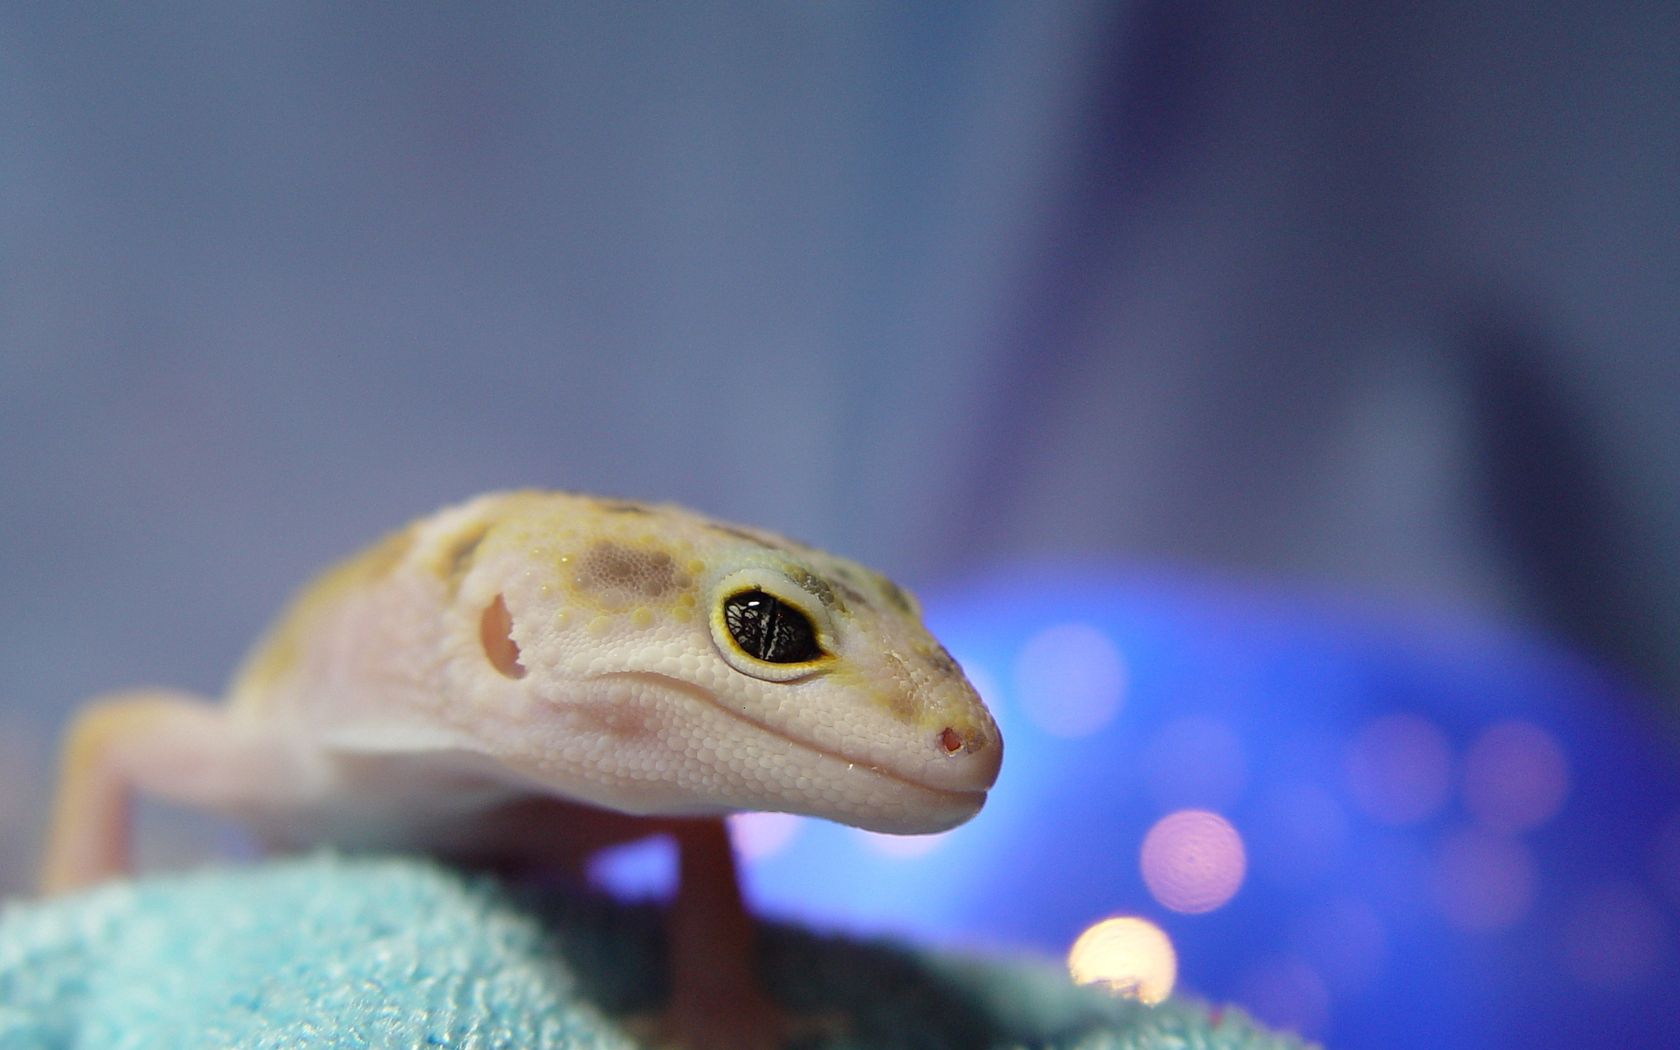 animals, muzzle, eyes, lizard, reptile, blurred, greased Aesthetic wallpaper